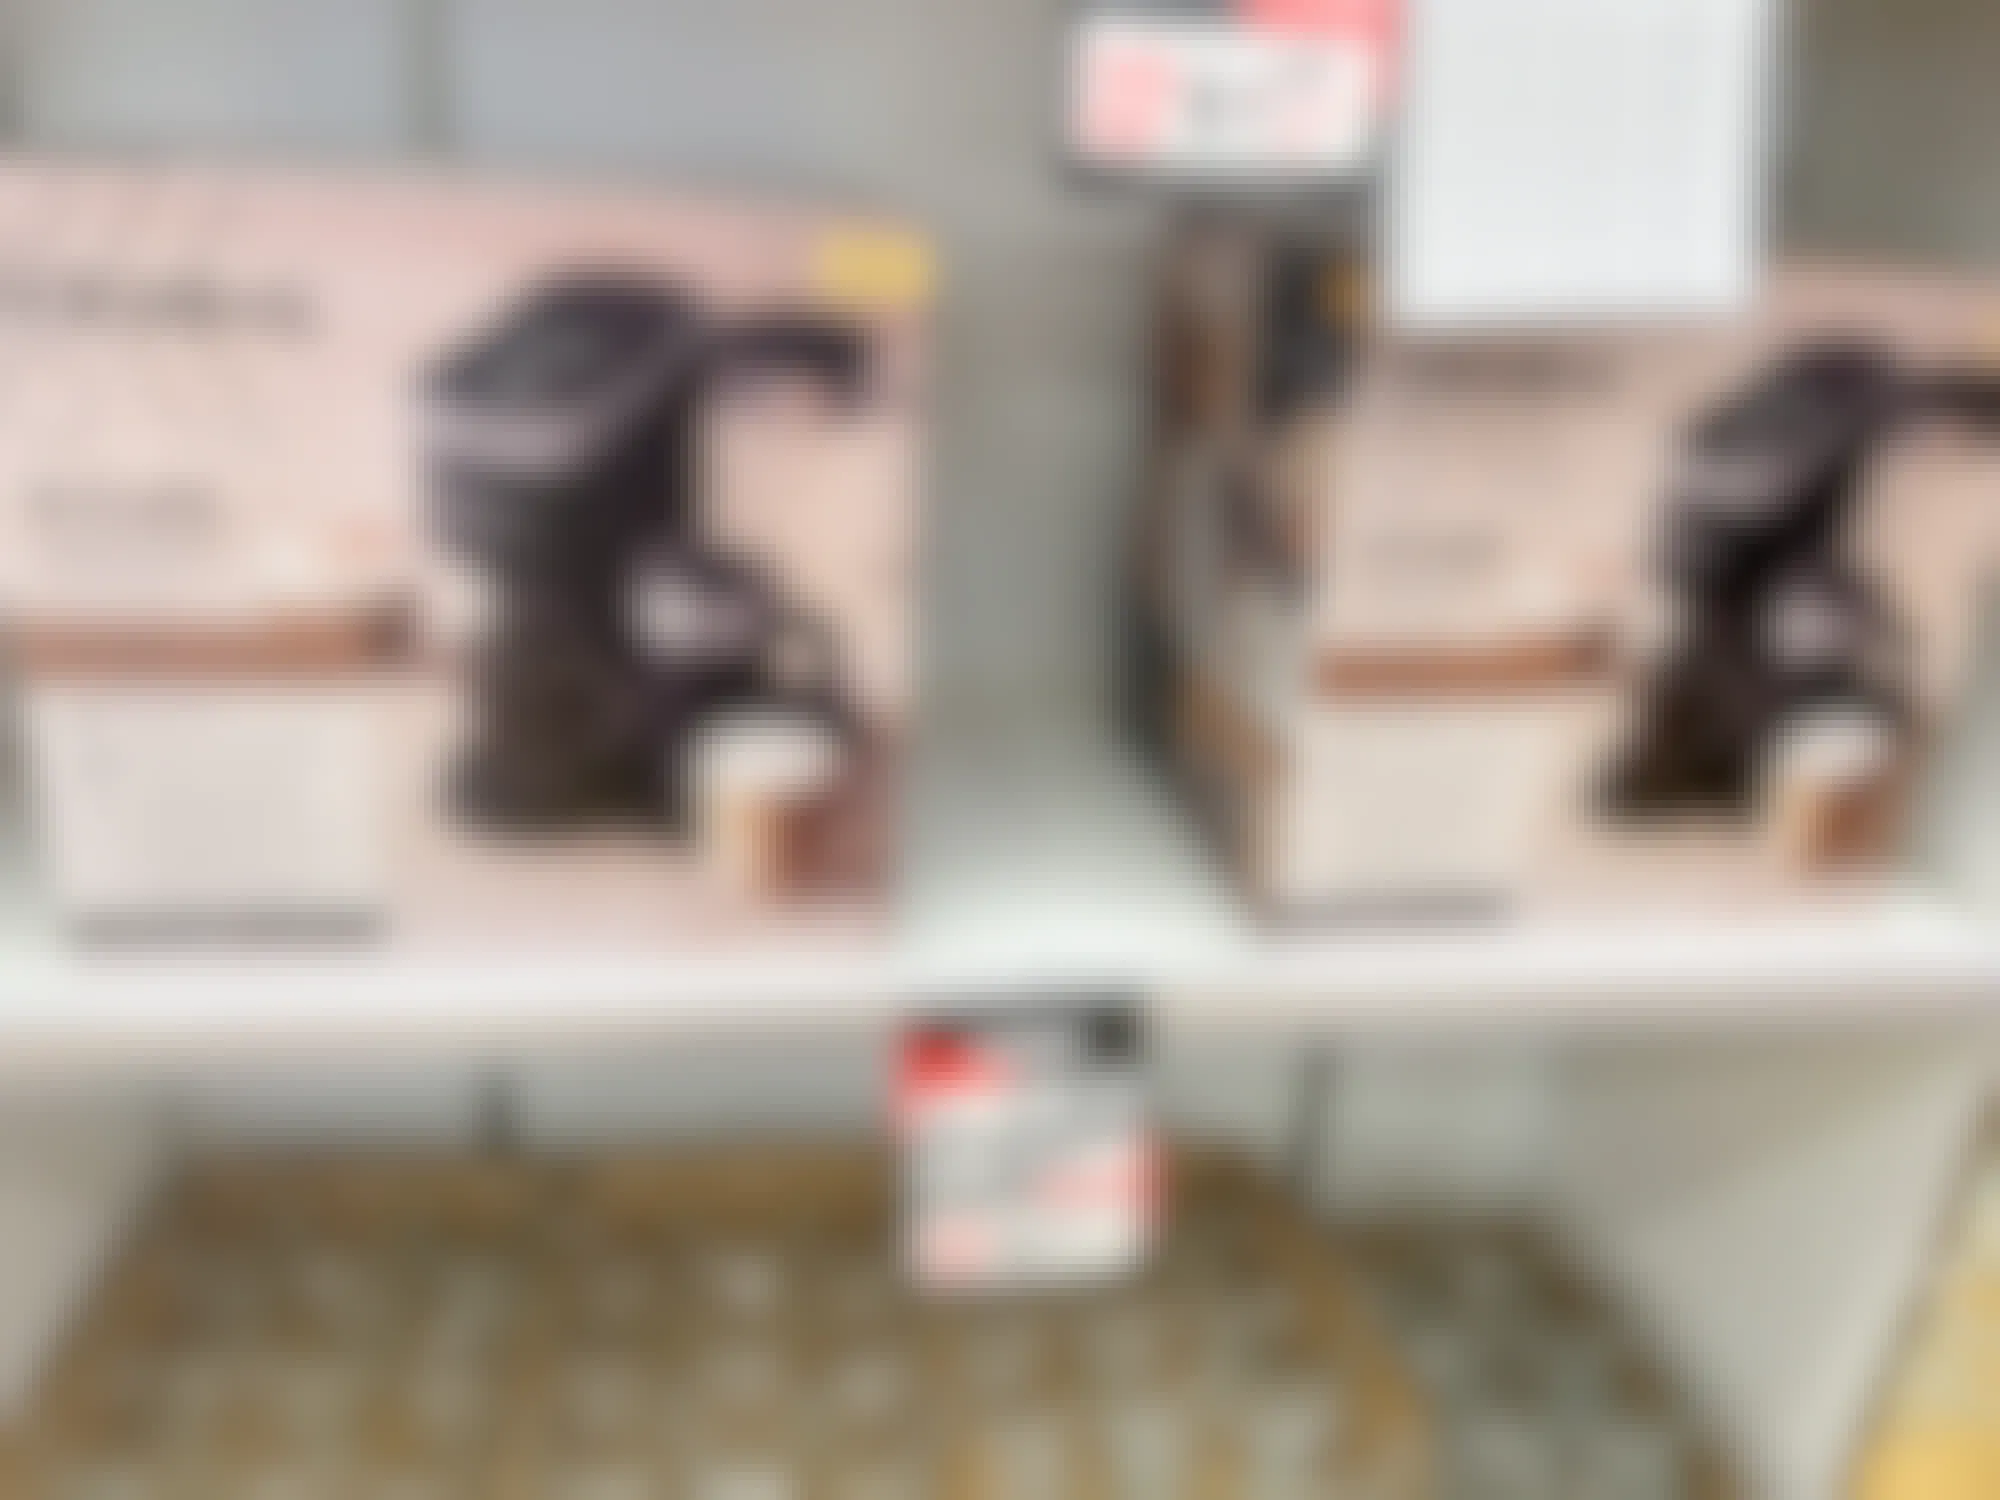 Keurig K Cafes on a shelf with a sale sign at Bed Bath and Beyond